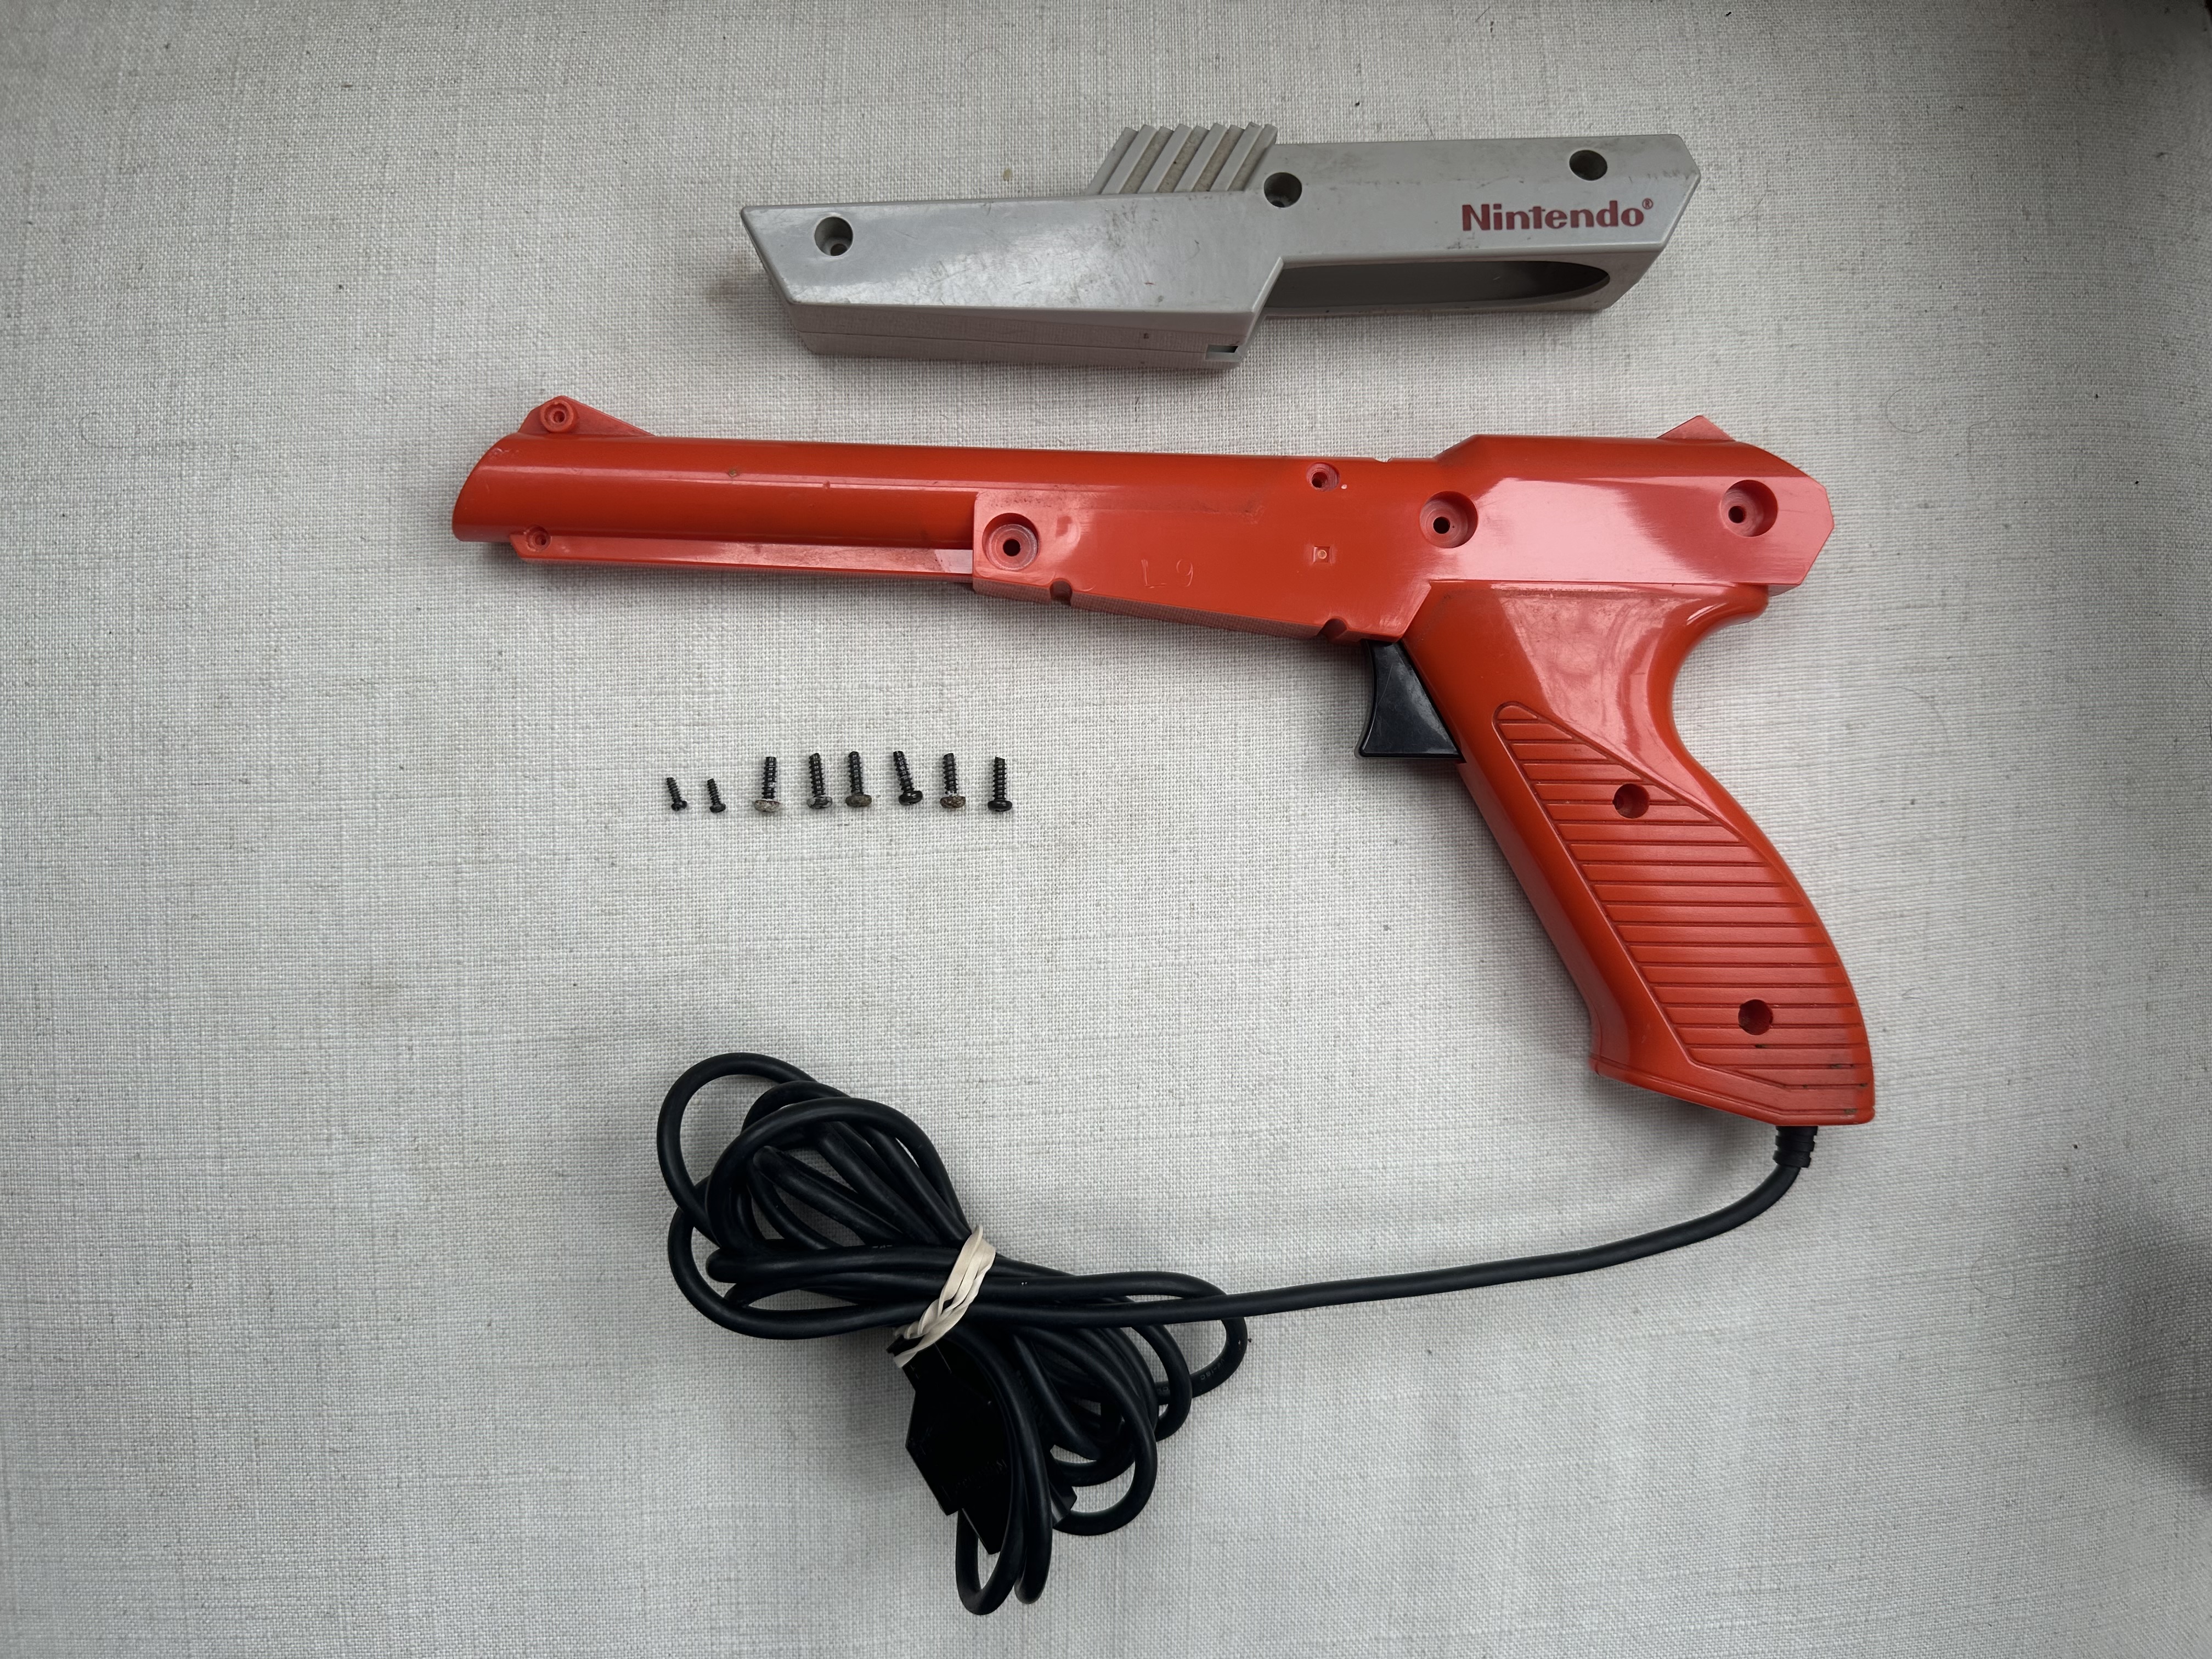 Lightgun with all of the screws removed